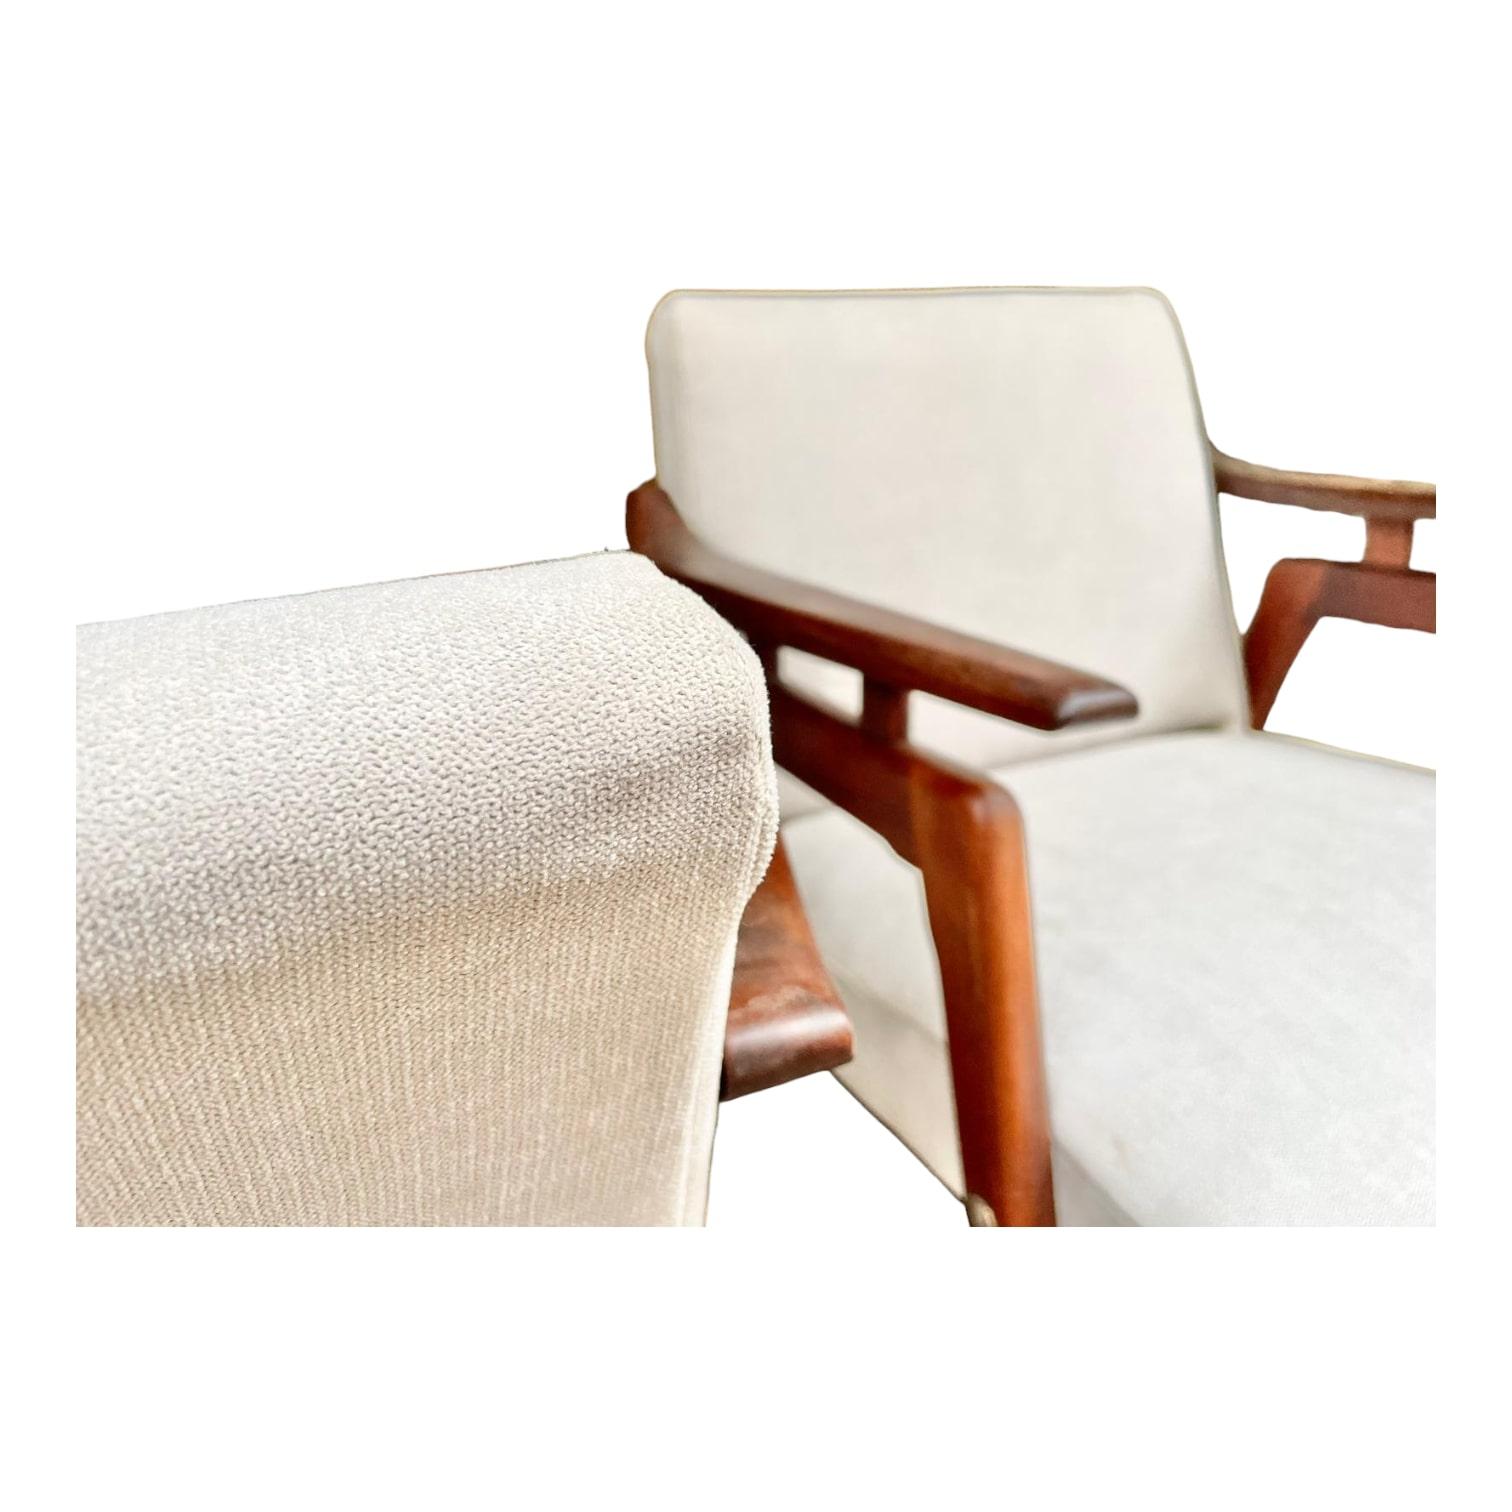 This superb Danish pair of armchairs, dating from the 1960s, is a unique collector's item. Its timeless design and seat height of 39 cm make it a piece of furniture that is both elegant and comfortable. The detailed images will allow you to